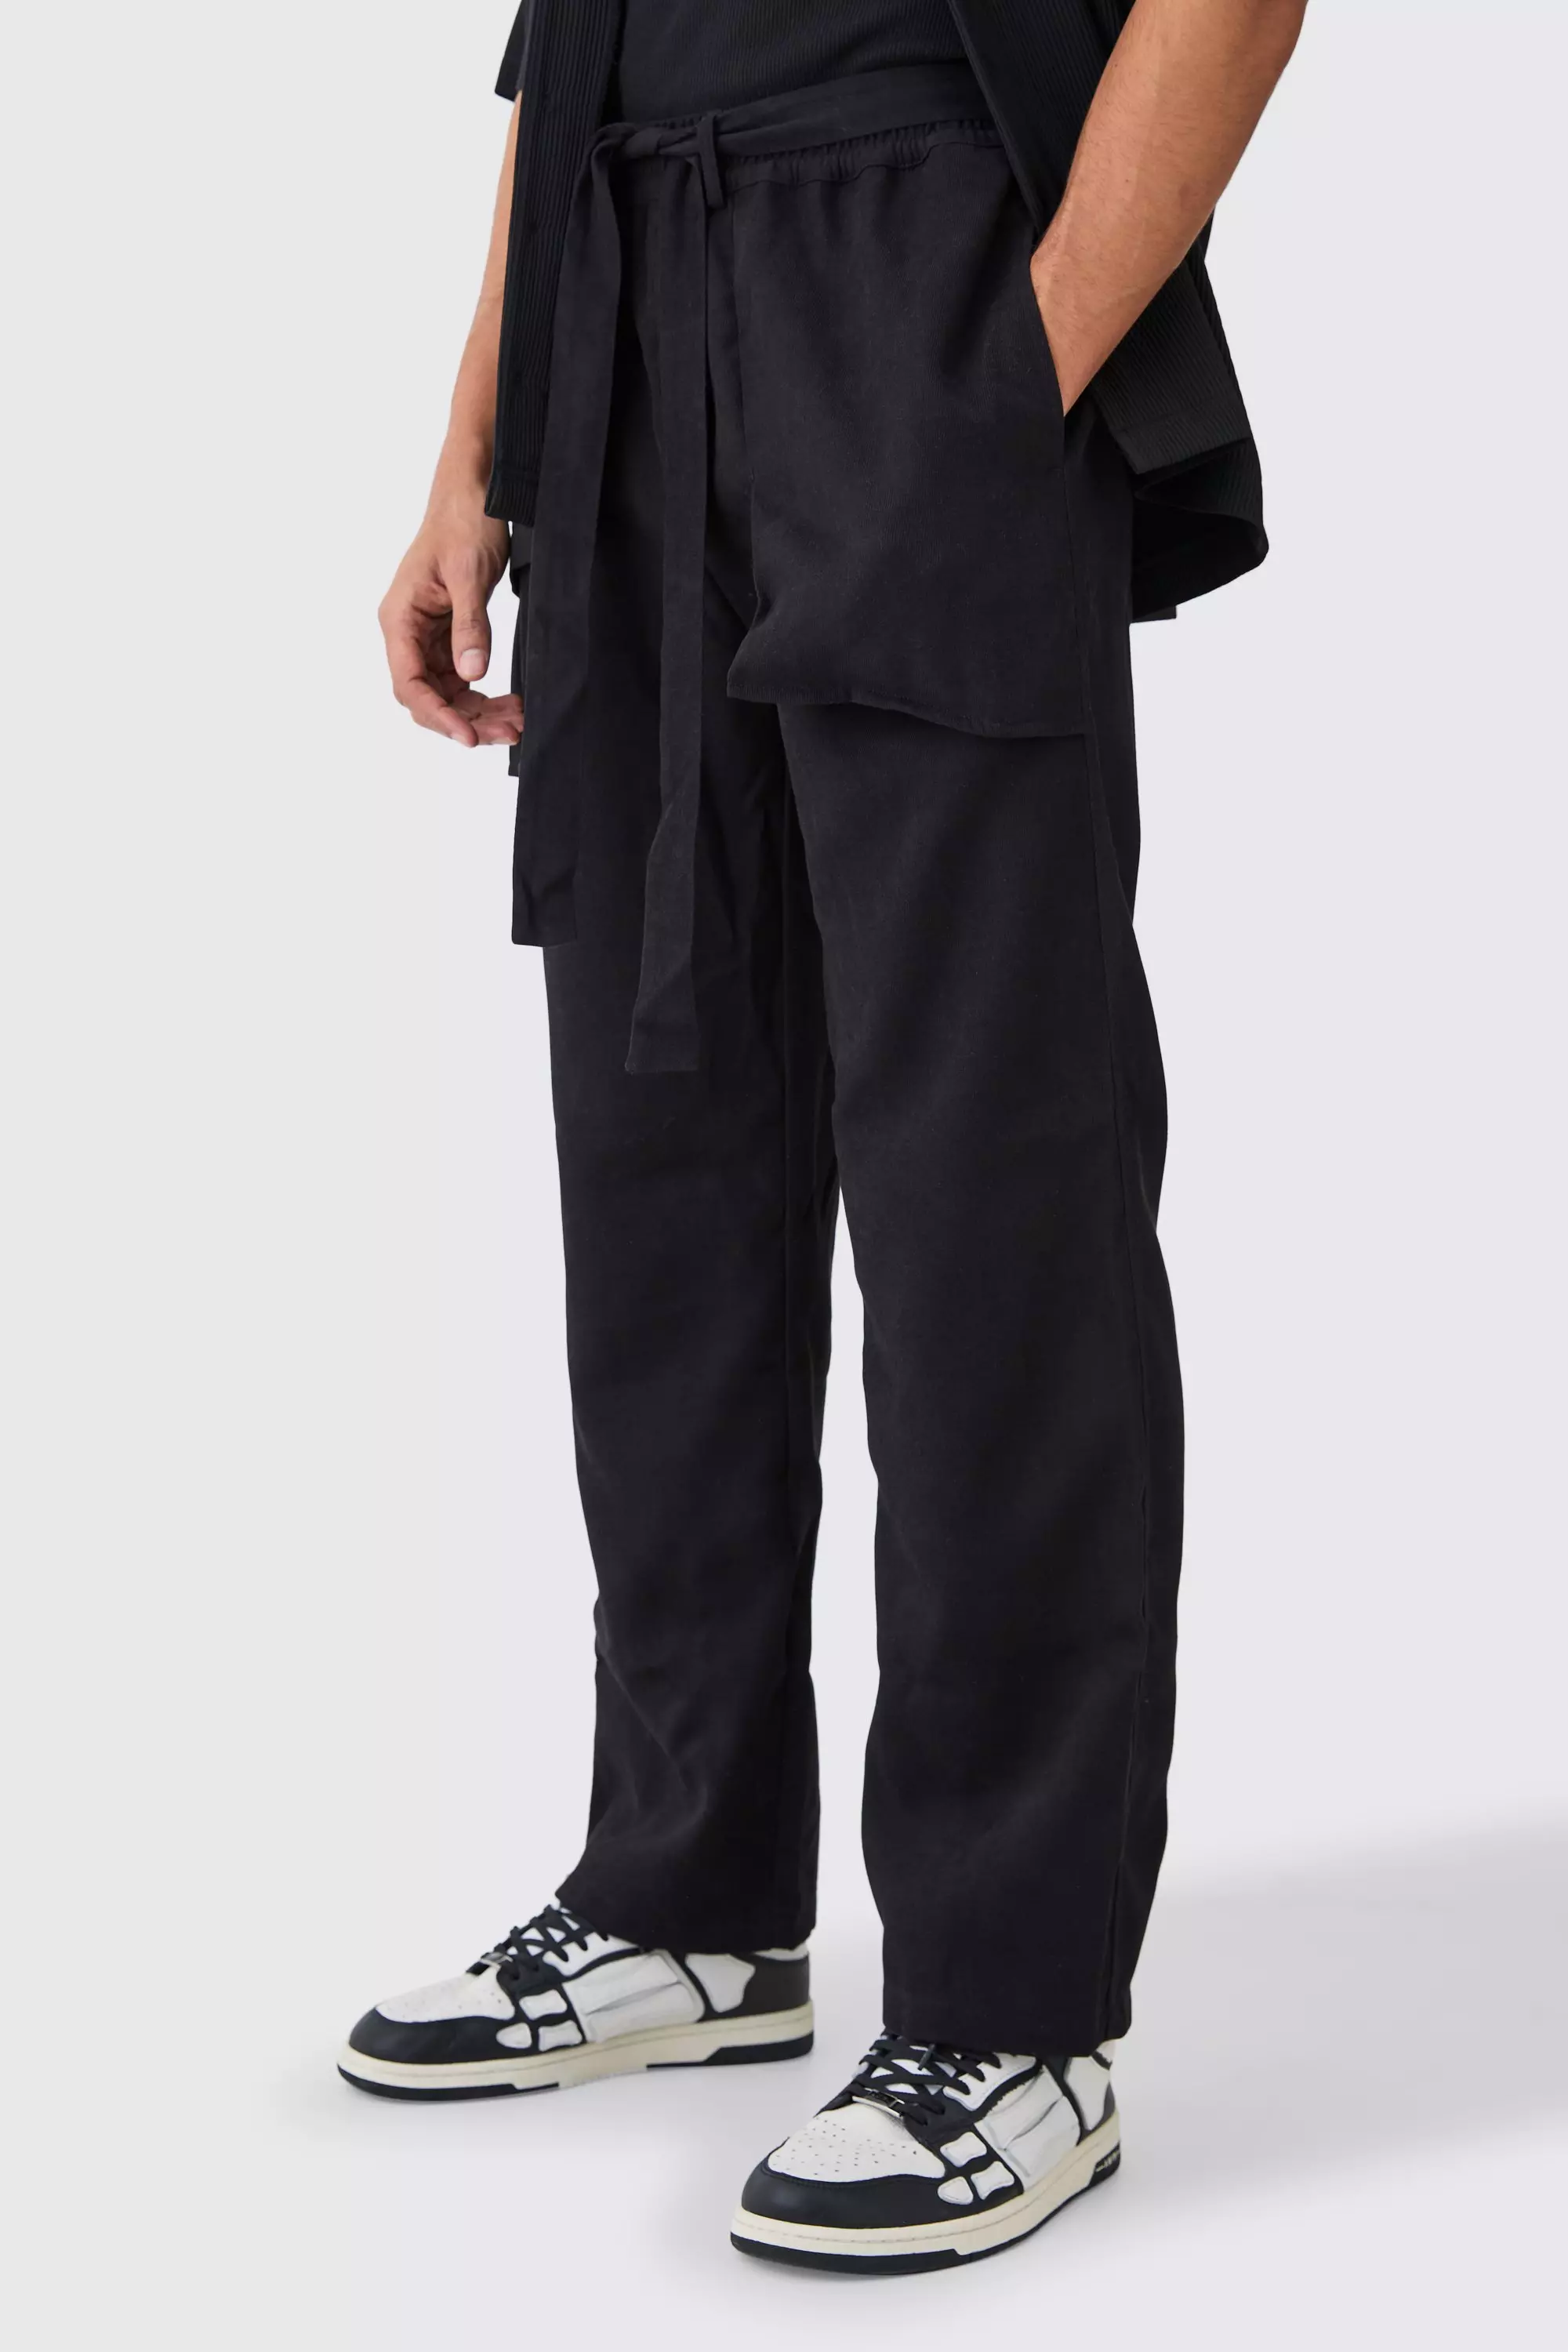 Elastic Waist Peached Relaxed Fit Trouser Black